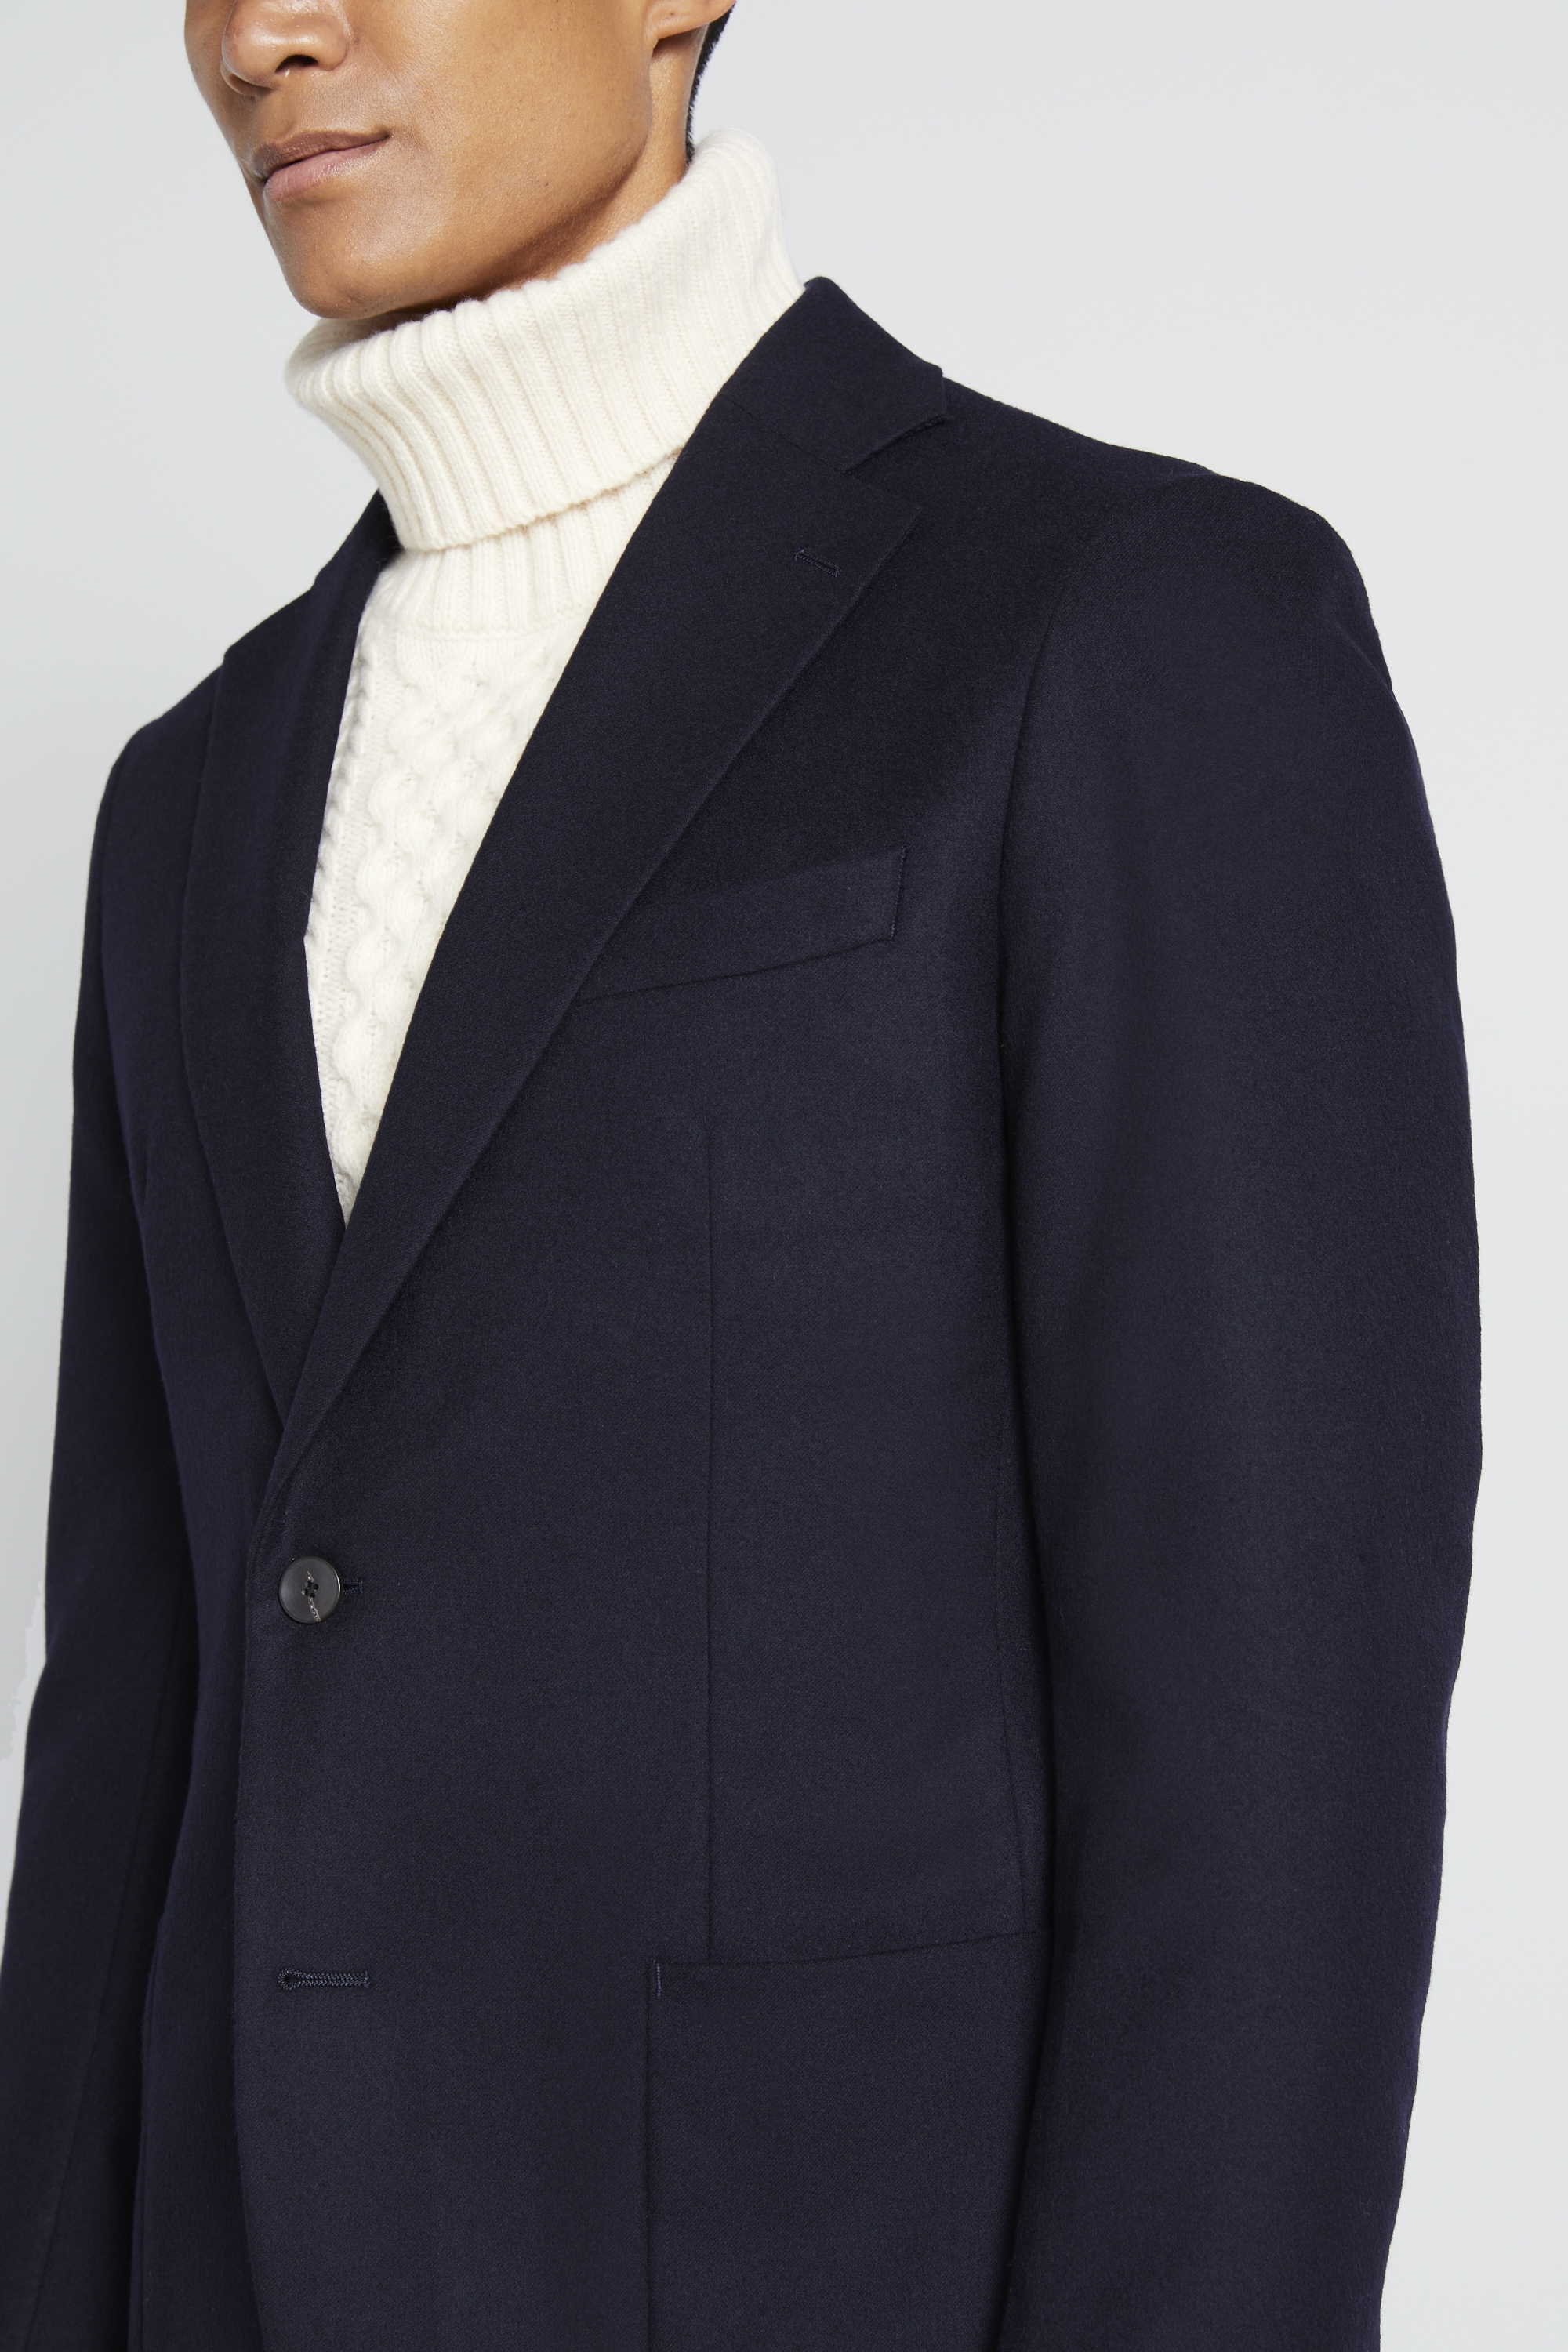 Navy Wool Jacket | Buy Online at Moss